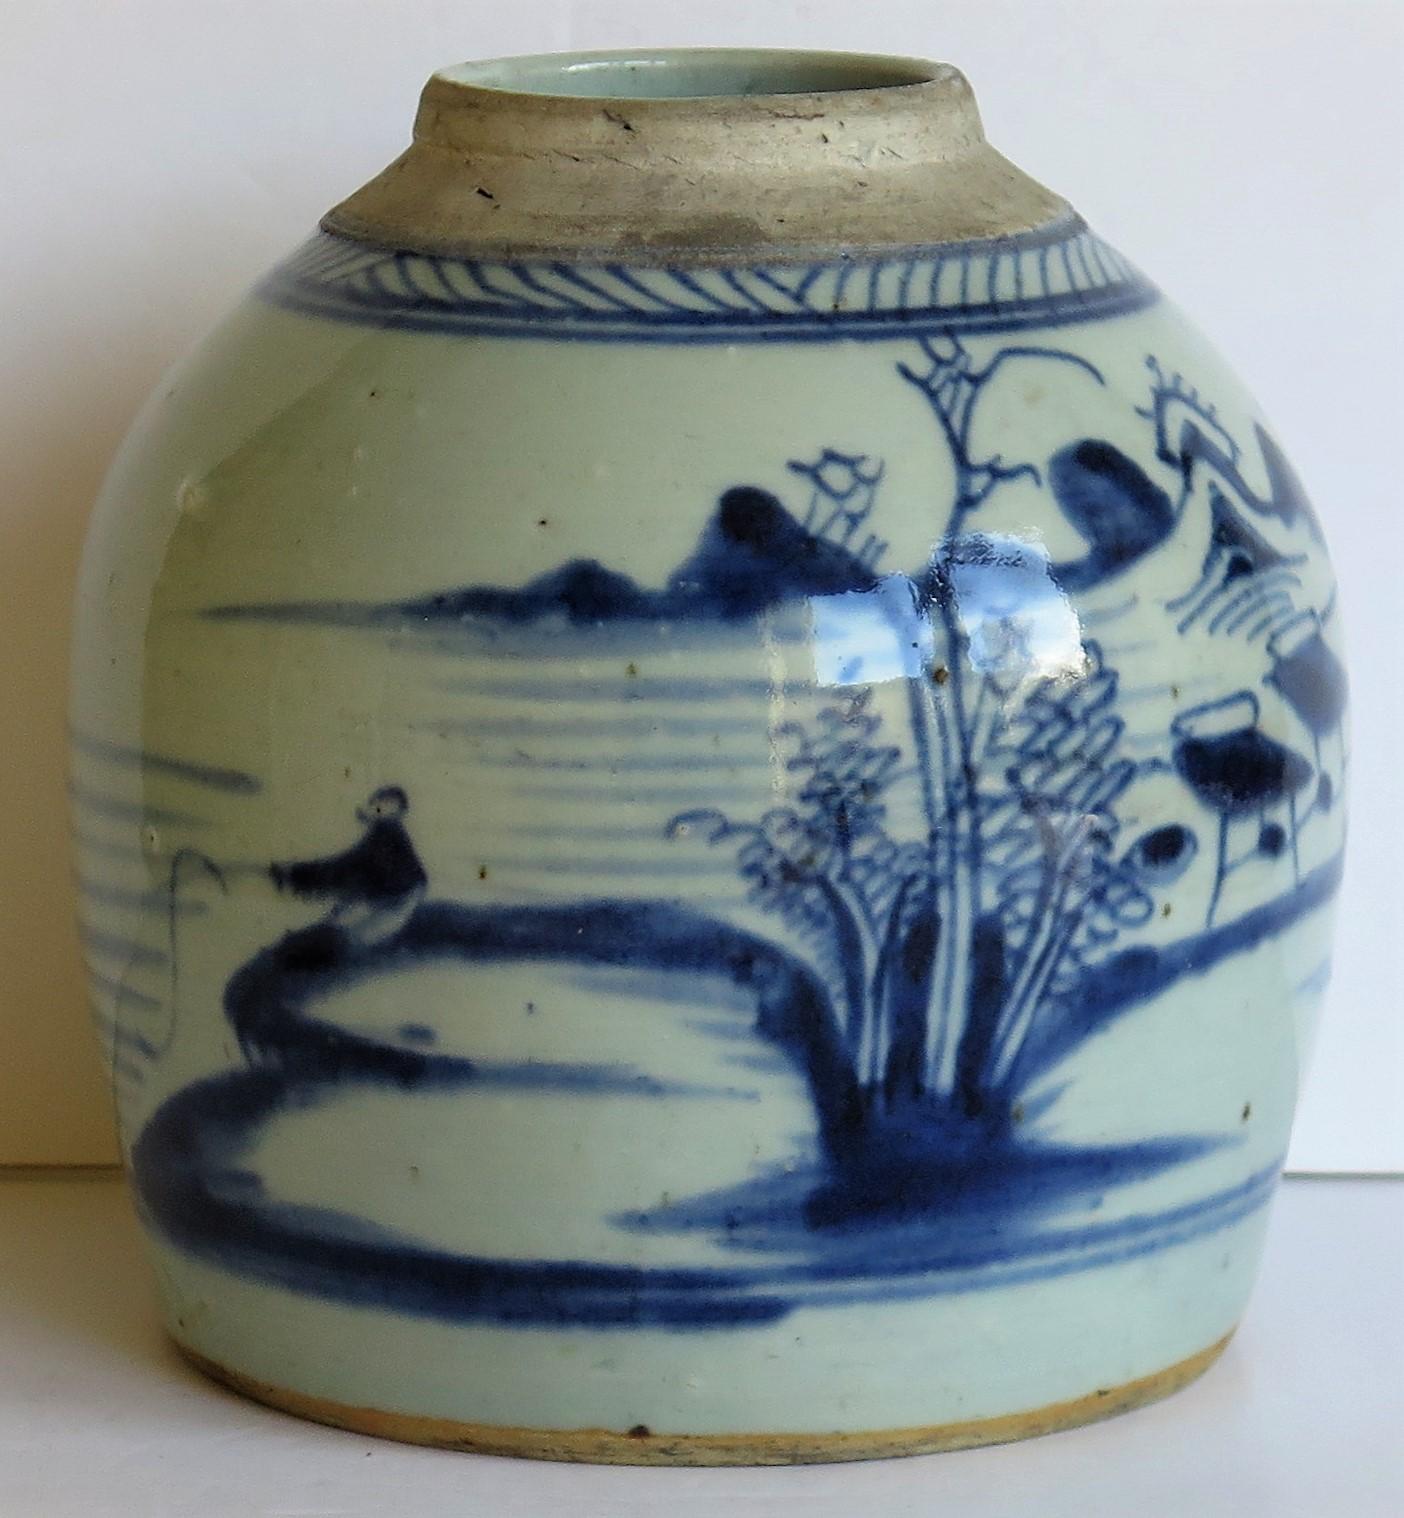 This is a heavy Chinese Export porcelain jar hand painted with a blue and white lakeside scene and dating to the late 18th century, Qing dynasty.

This is a well potted piece with a very decorative squat shape and a glassy glaze having a blue